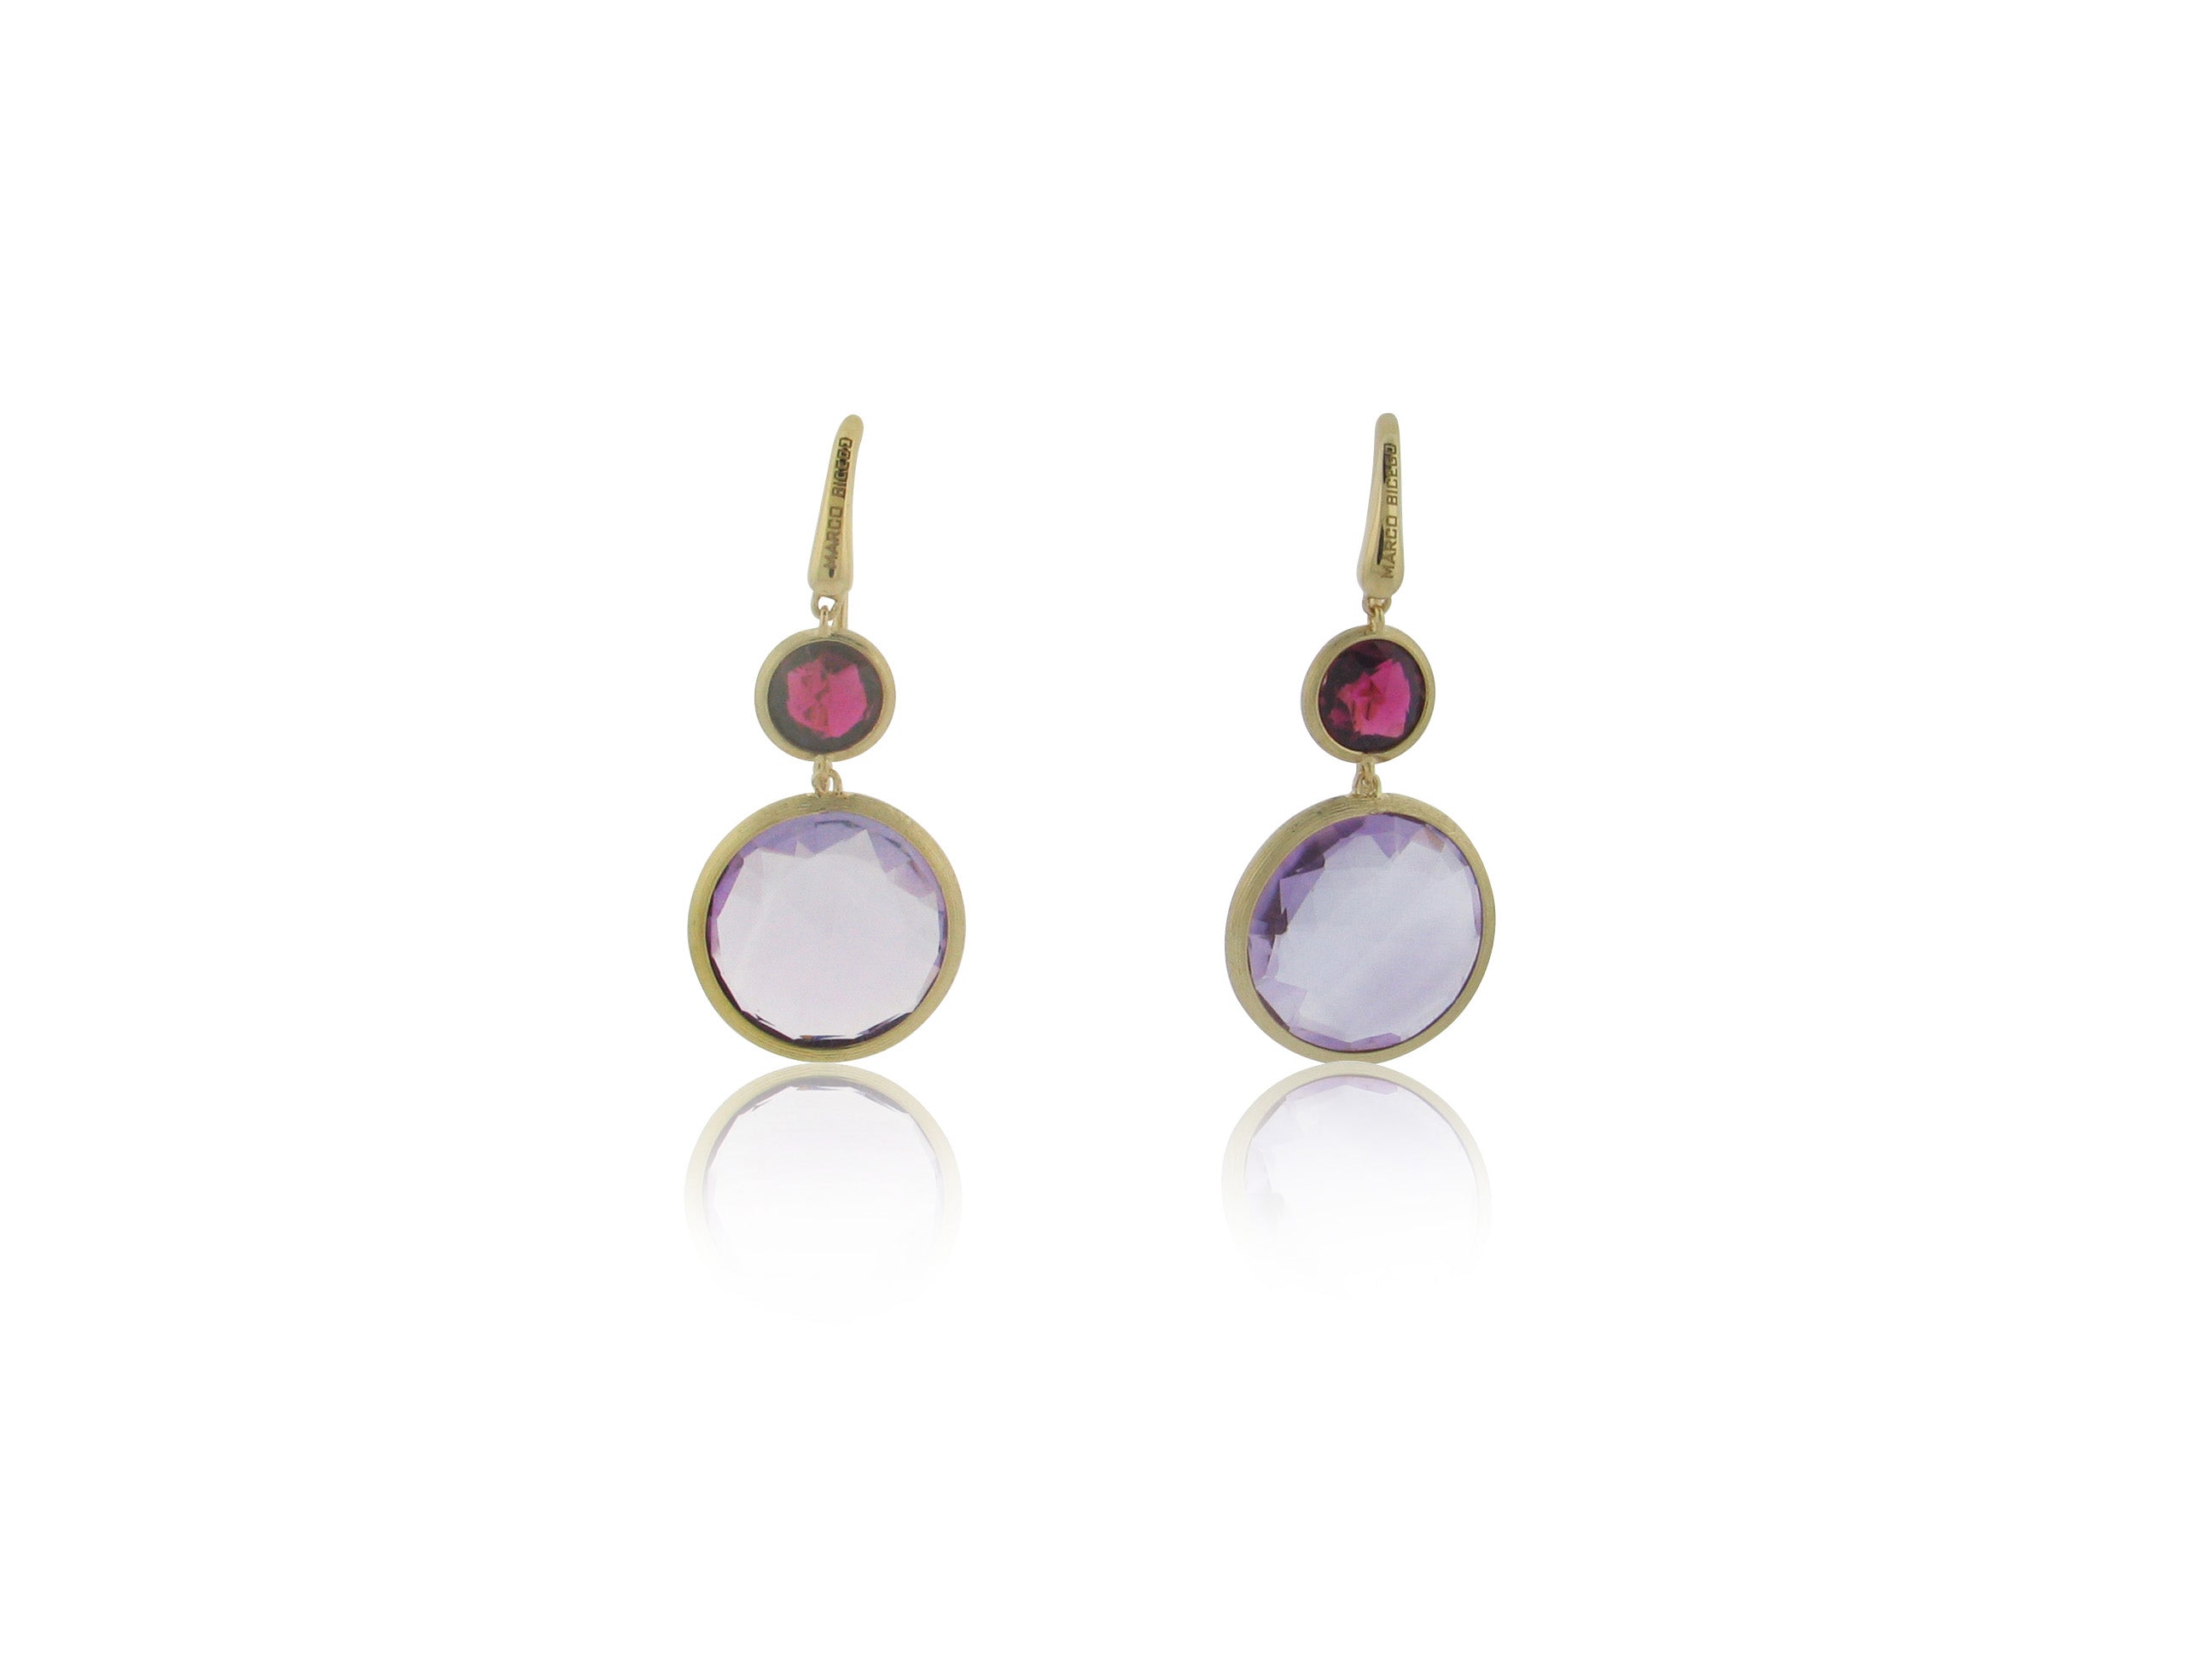 MARCO BICEGO 18K YELLOW GOLD PTOURMALINE AND AMETHYST DANGLE EARRINGS FROM THE JAIPUR COLLECTION